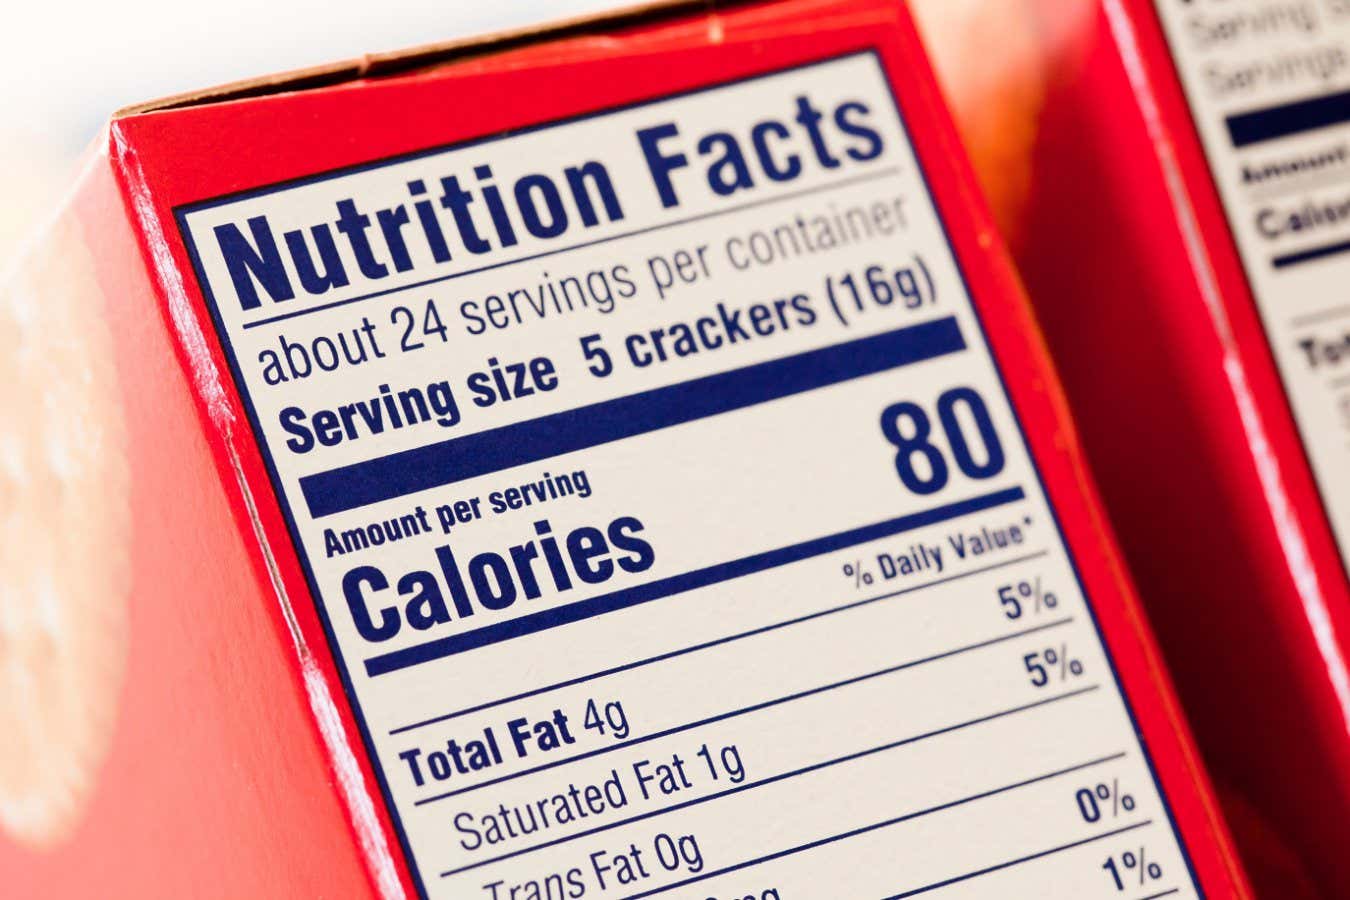 PRJWHE Nutrition facts label on box of crackers - USA